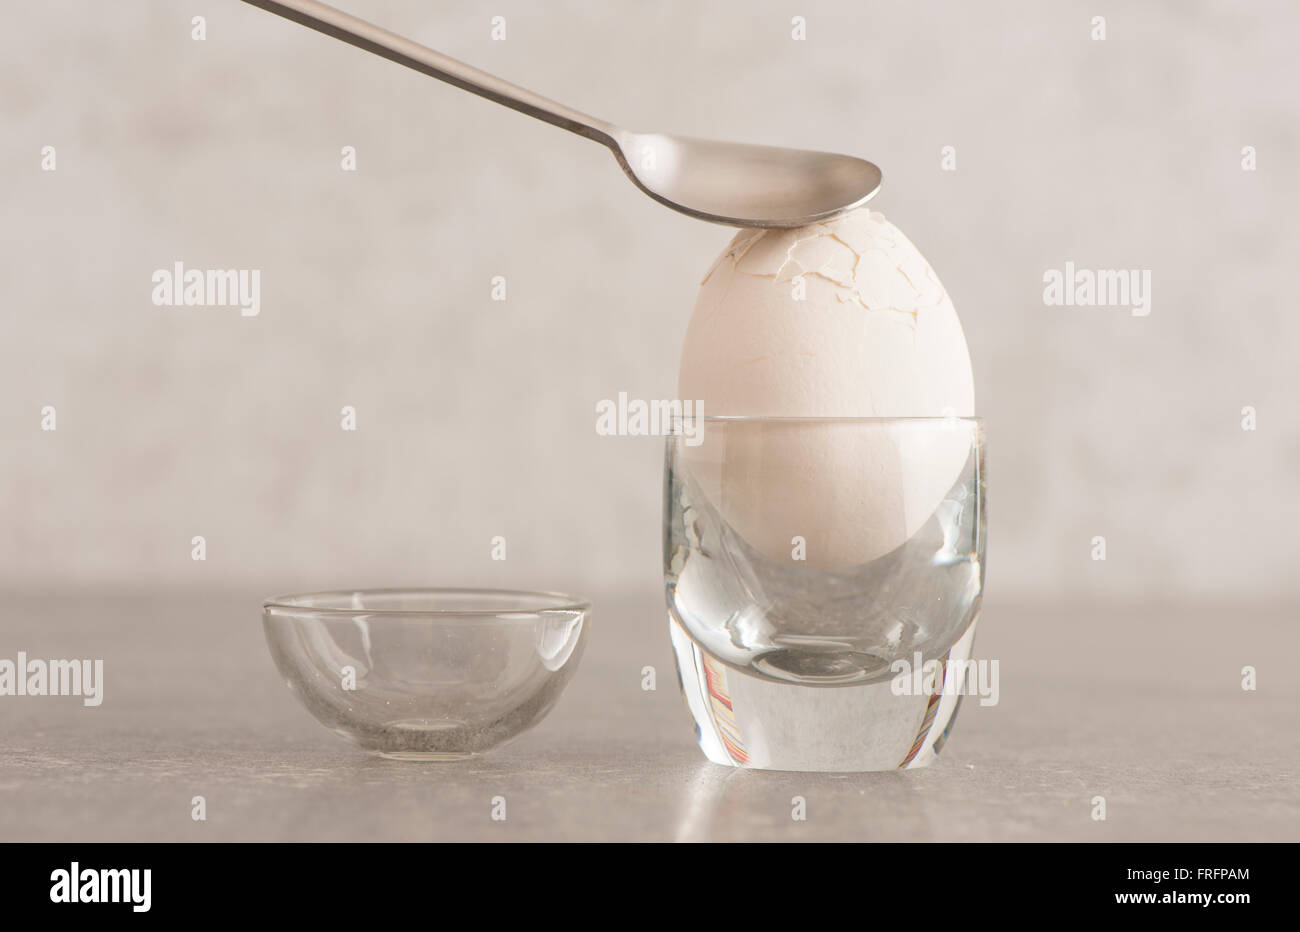 Boiled breakfast egg. The shell is cracked with a spoon. Concept of healthy eating and morning habits. Stock Photo